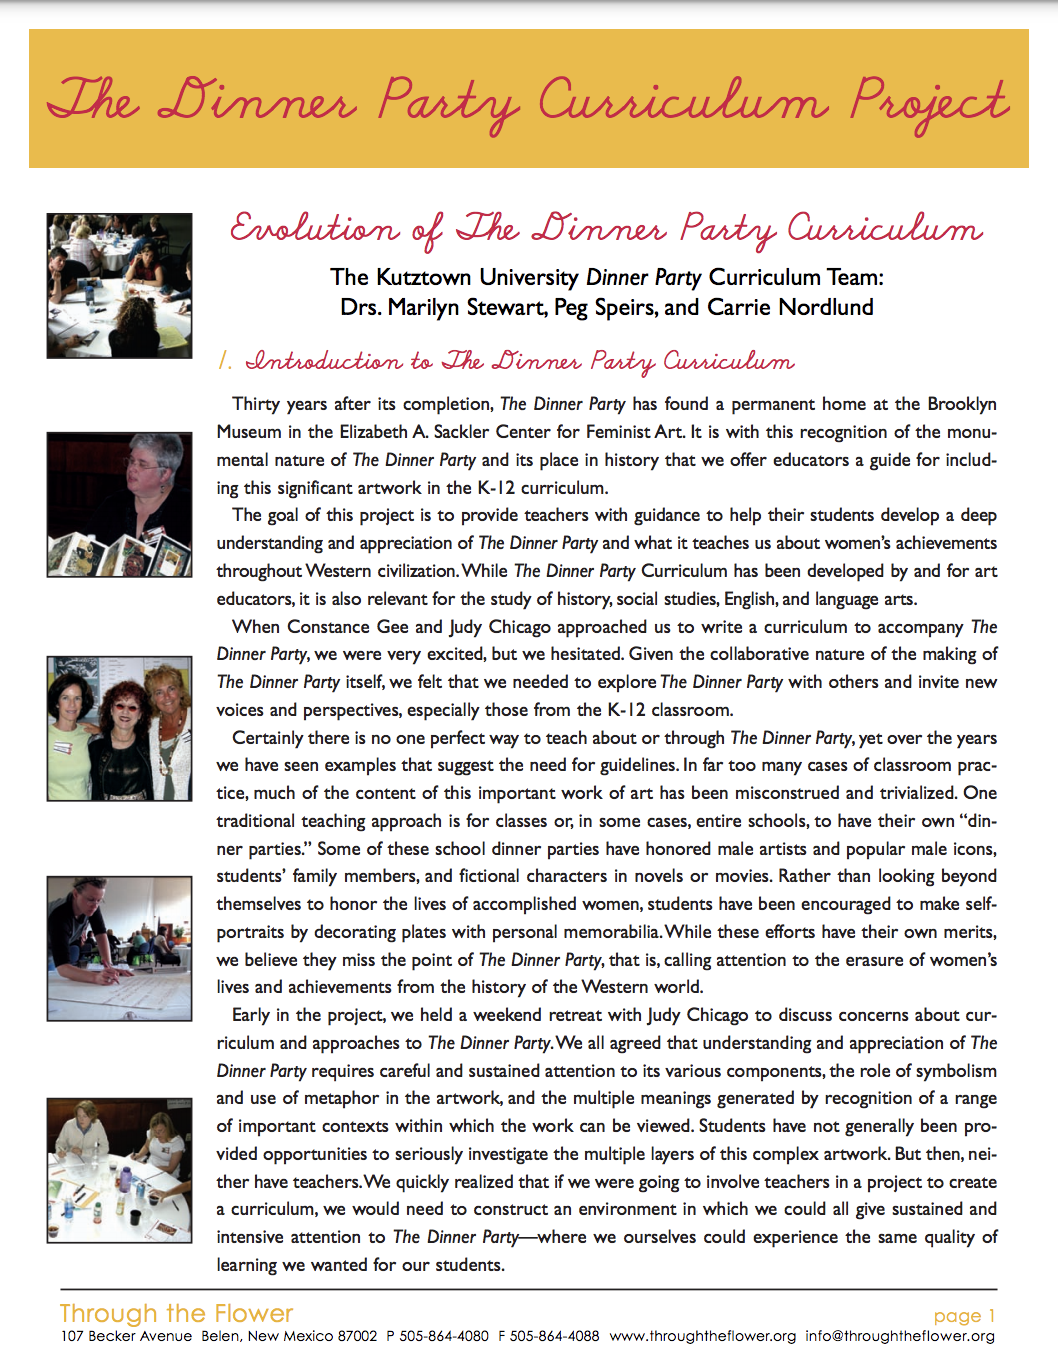 The Dinner Party Curriculum Project